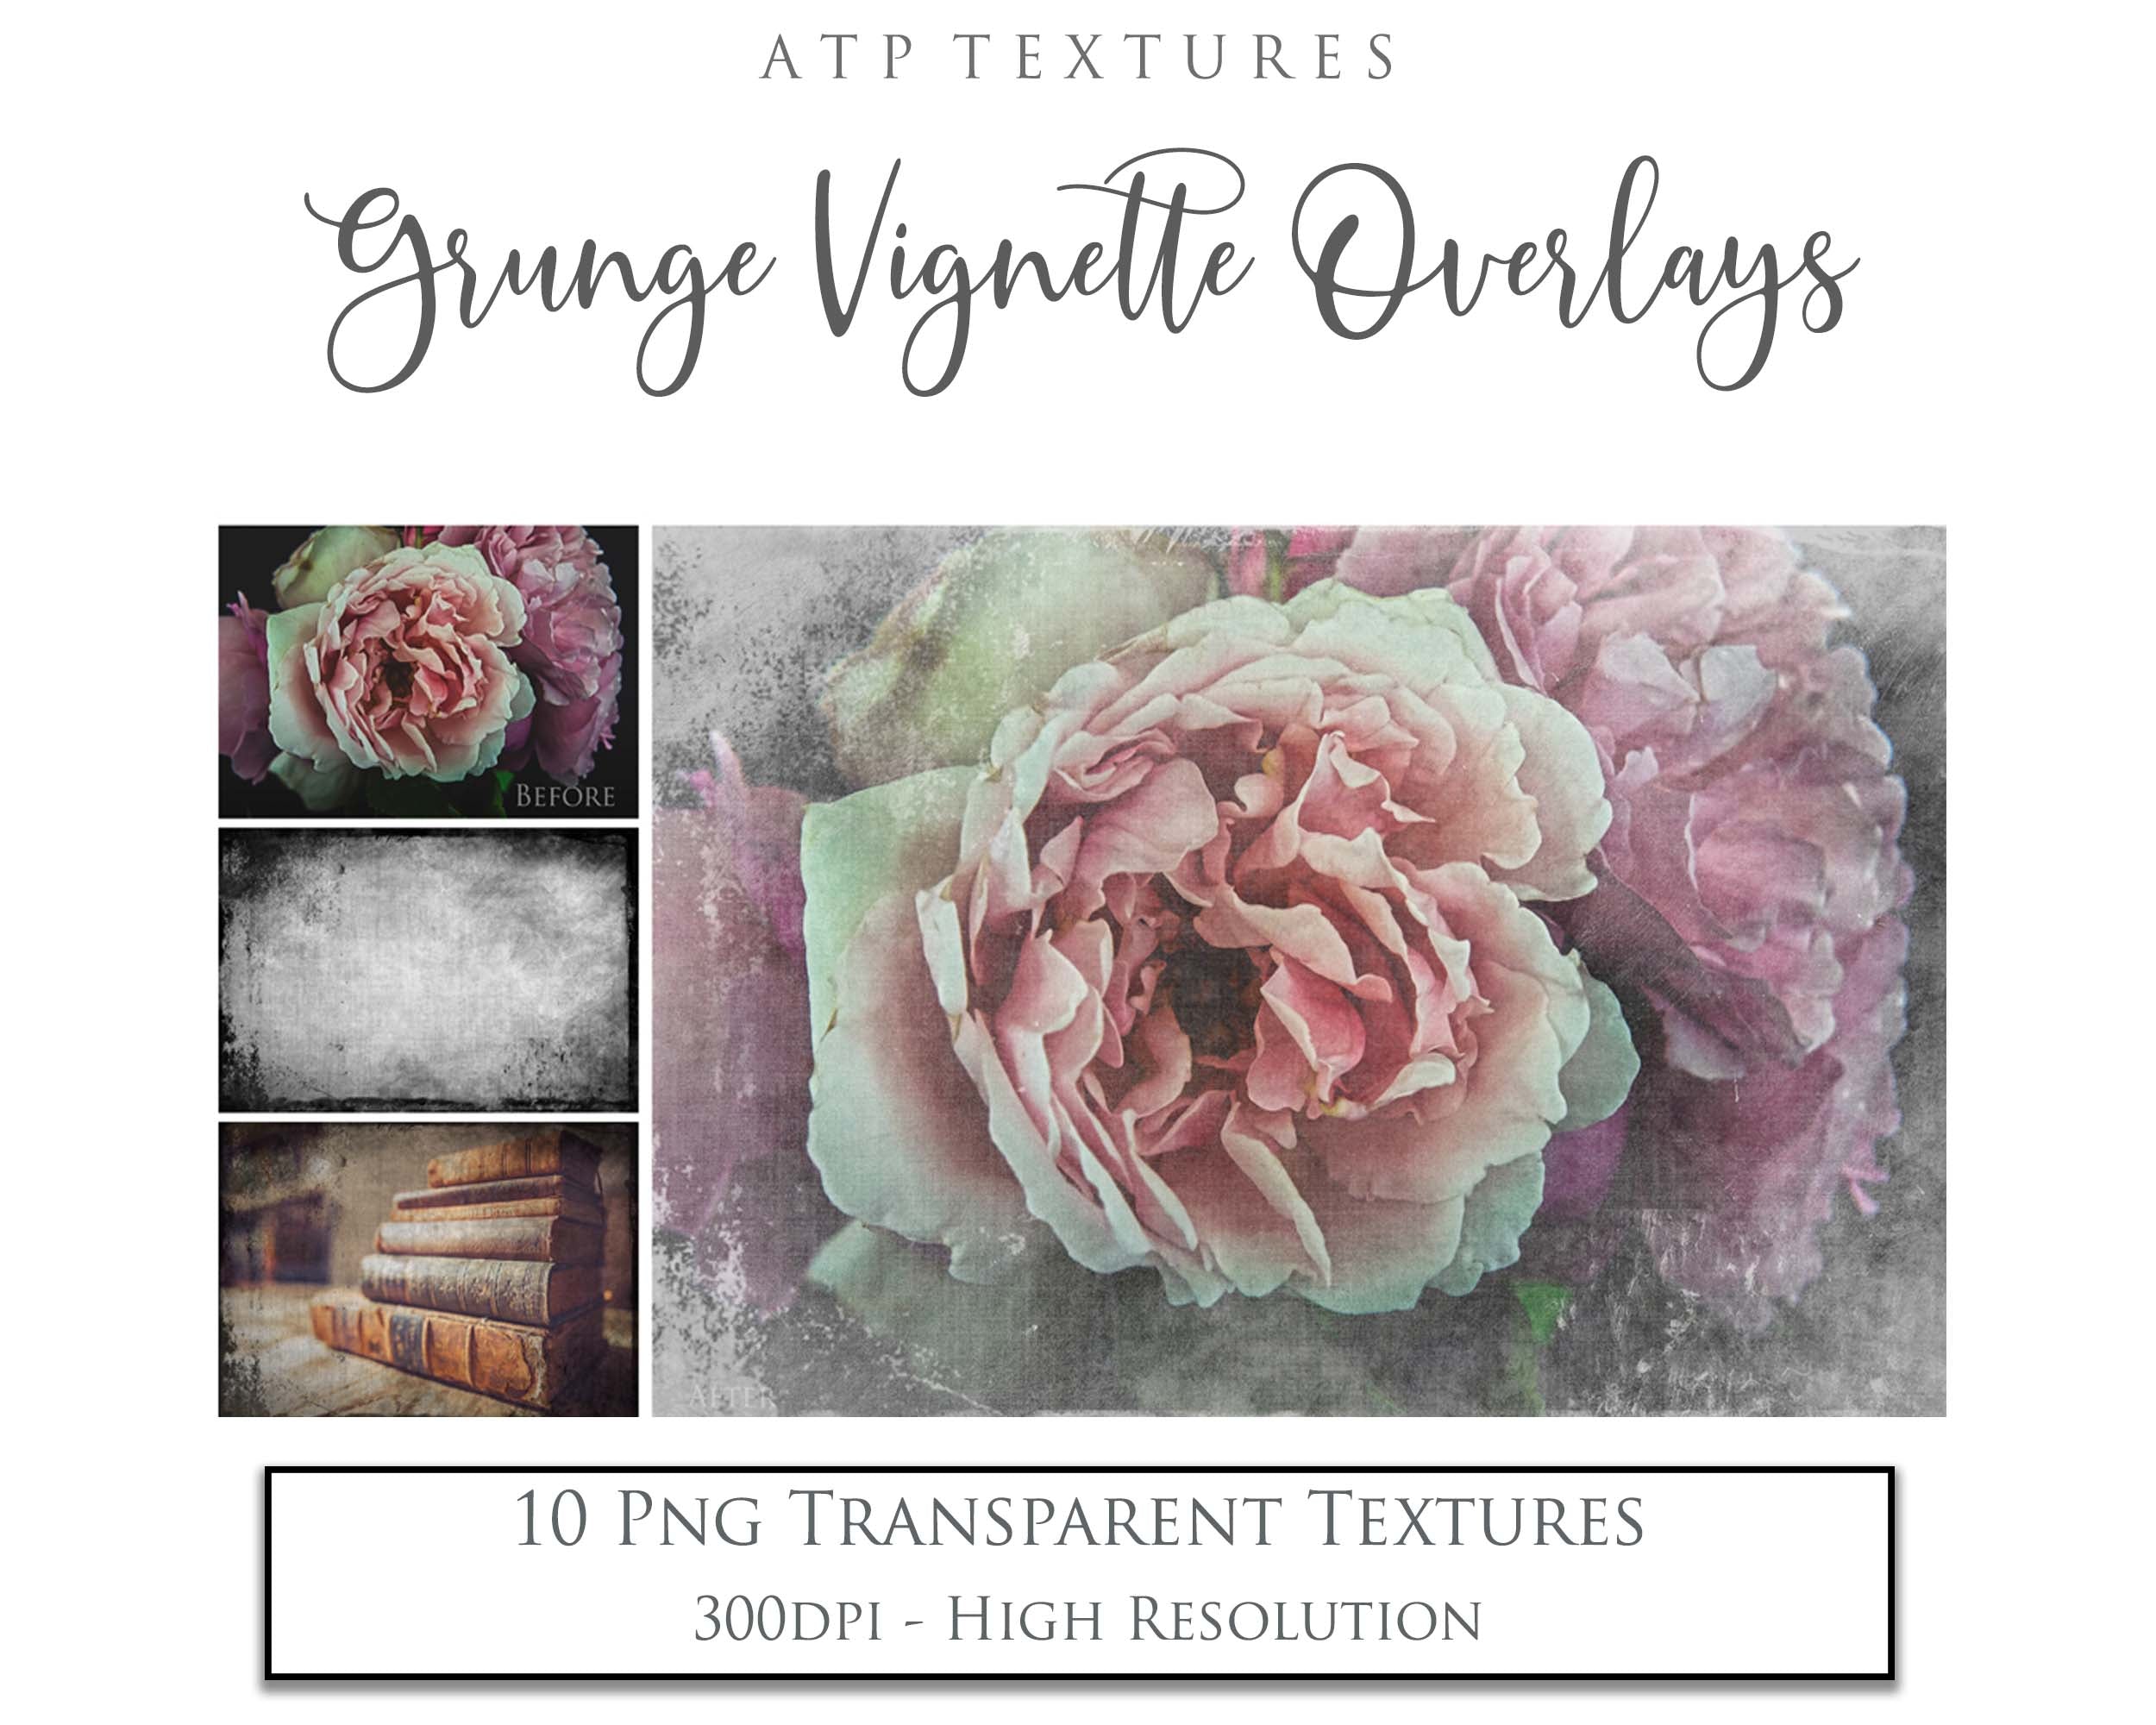 16 GRUNGE Clipping Masks, Fine Art High Resolution Overlays for Photographers, Digital Art and Scrapbooking. Photoshop Photography. Fine art realistic. In high resolution, perfect for your next edit or project! Png graphic photography assets. Sublimation art. ATP Textures